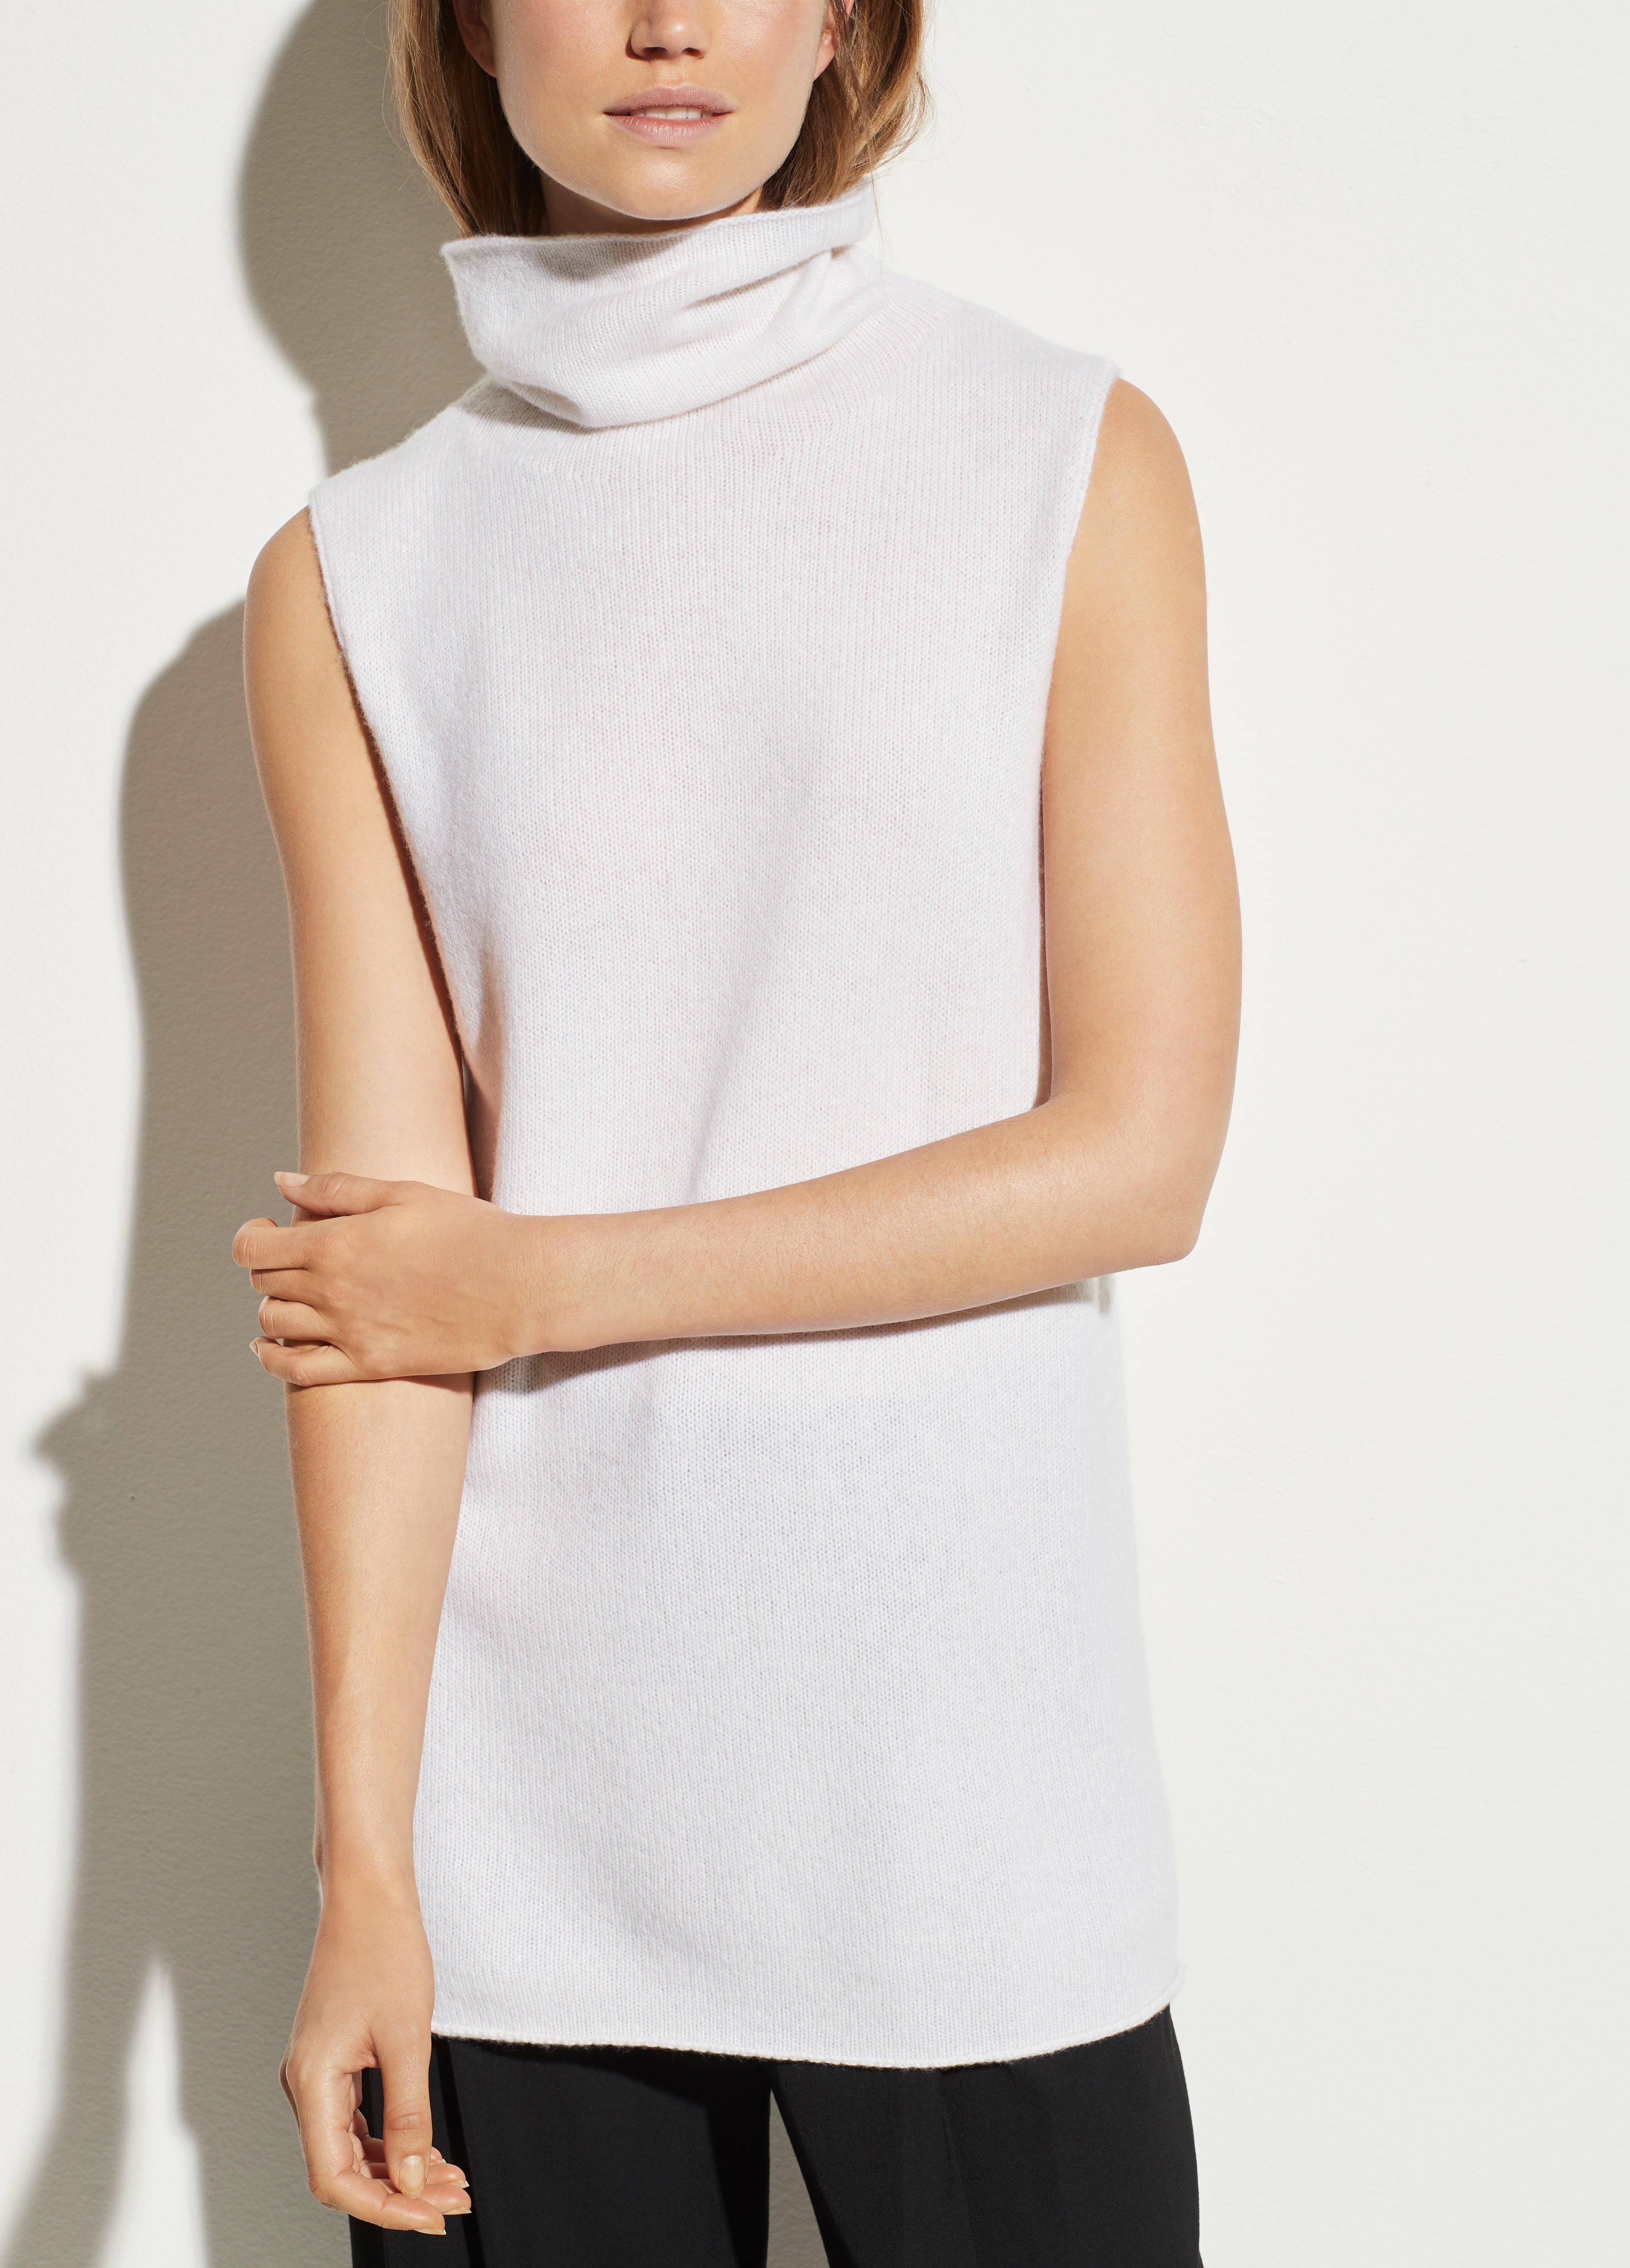 Sleeveless Turtleneck in Vince Products Women